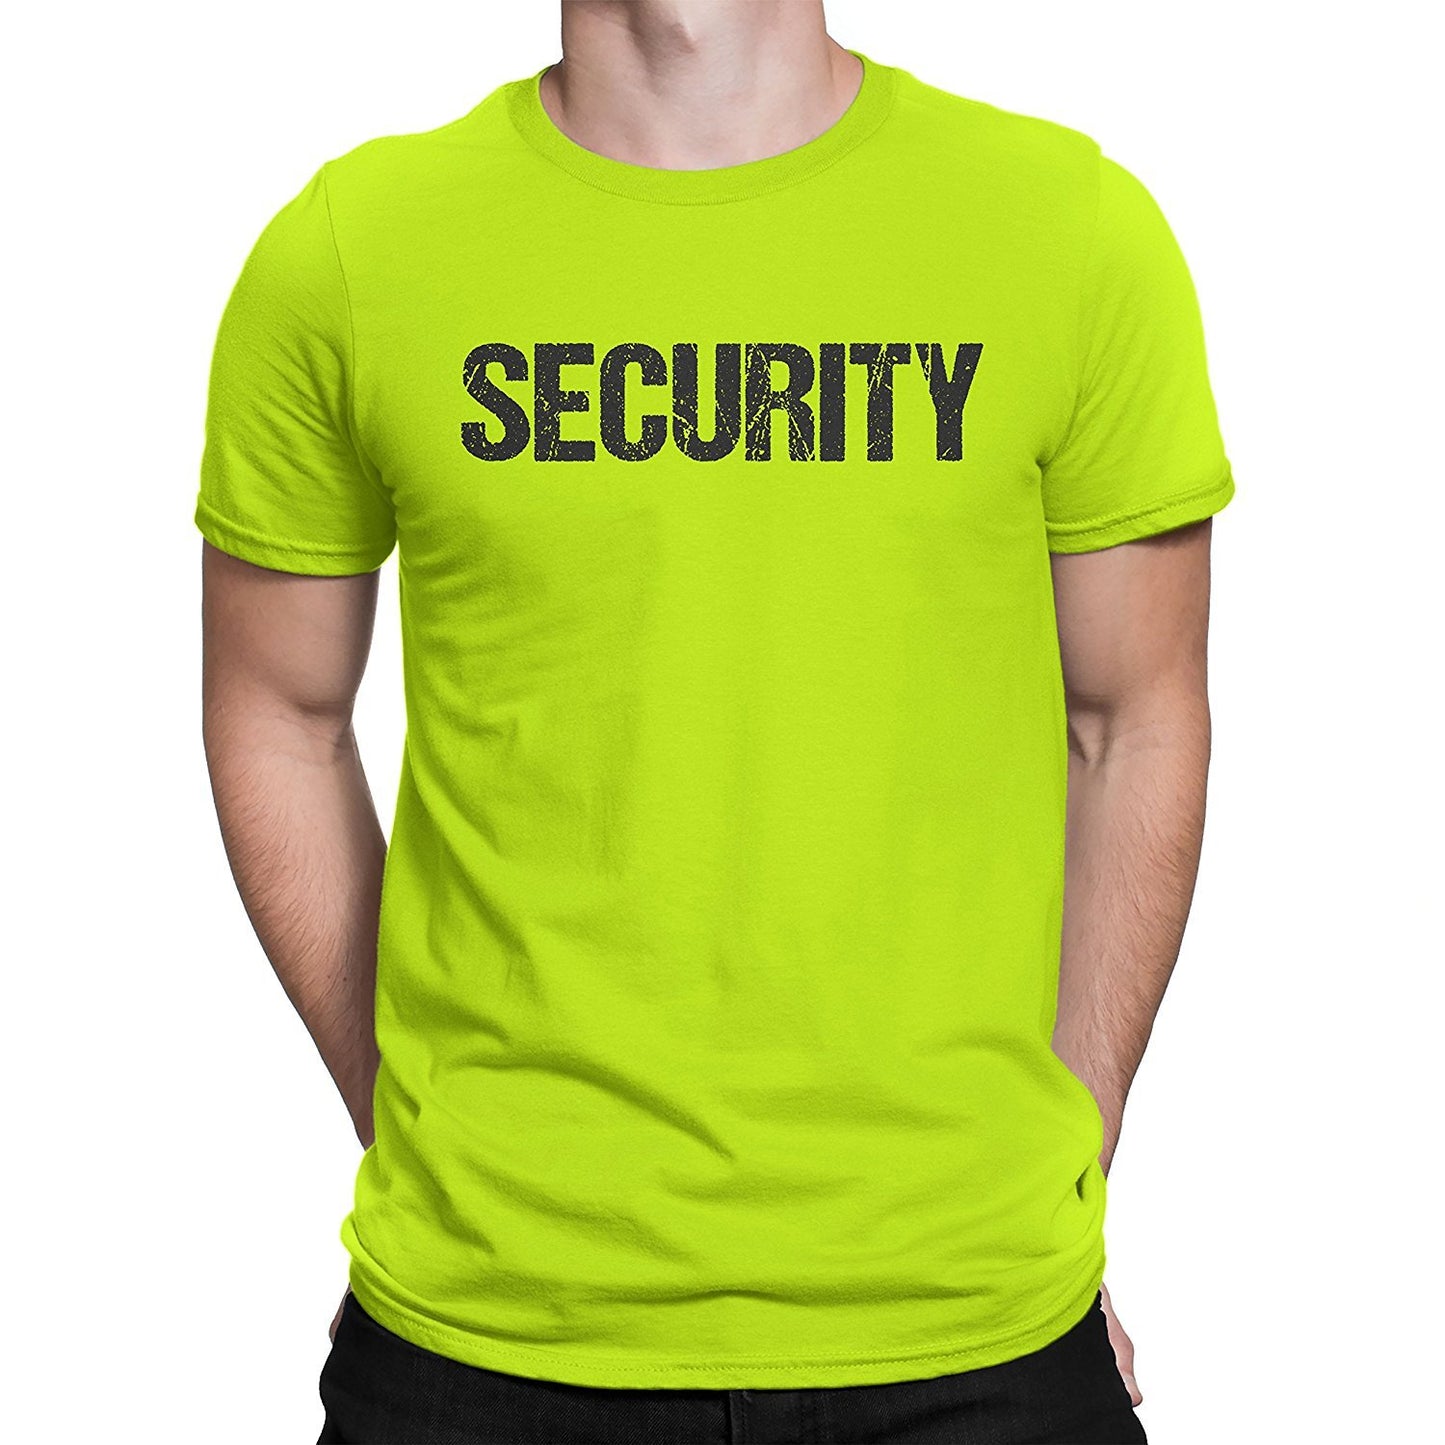 Security Tee Neon T-Shirt Mens Tee Staff Event Crew Shirt Front & Back Print